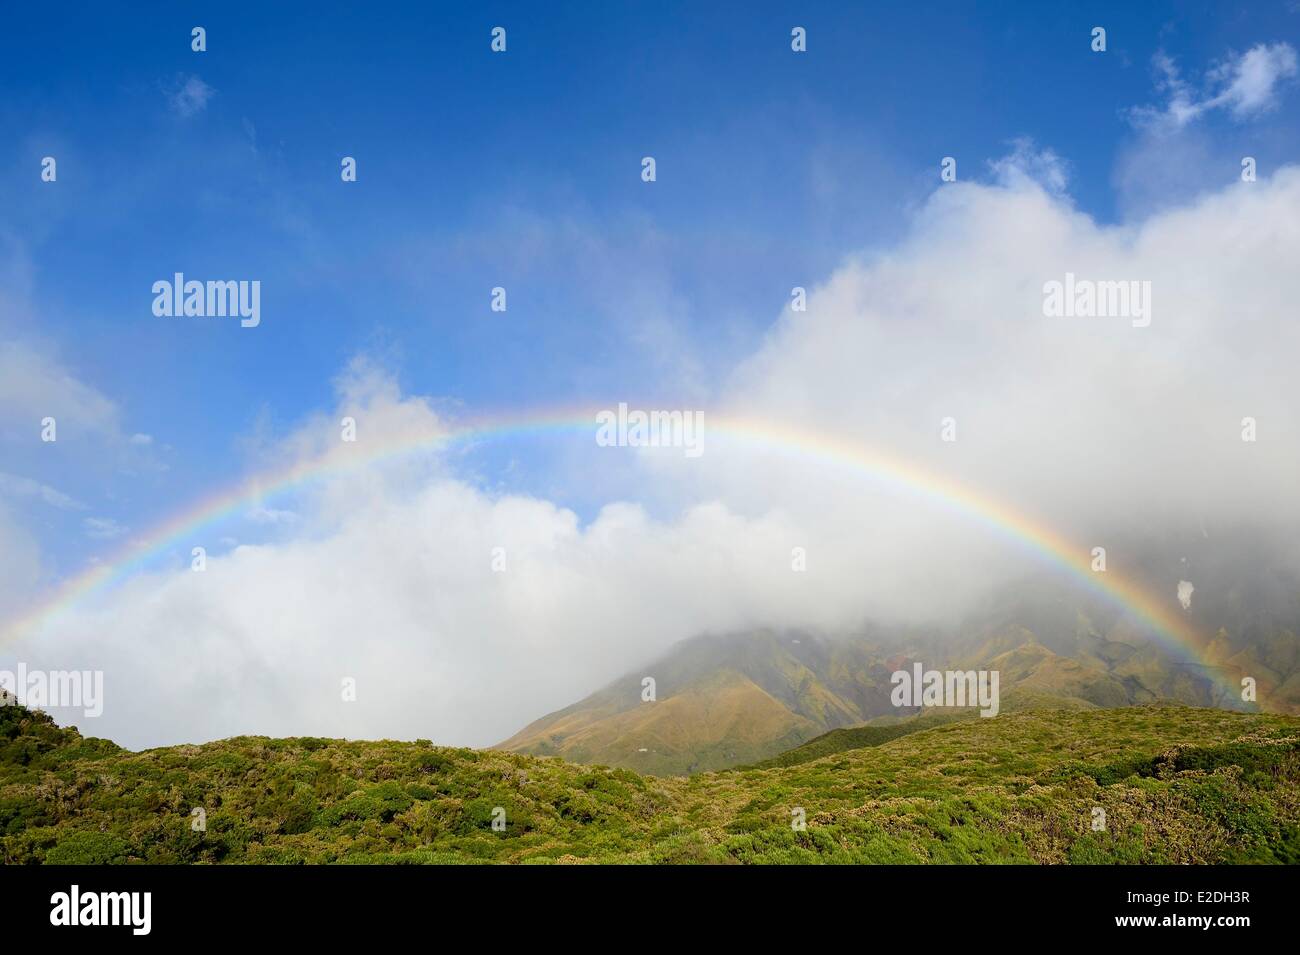 New Zealand, North Island, Egmont National Park, a rainbow at the foot of Mount Taranaki which is the largest andesitic stratovolcano in New Zealand Stock Photo